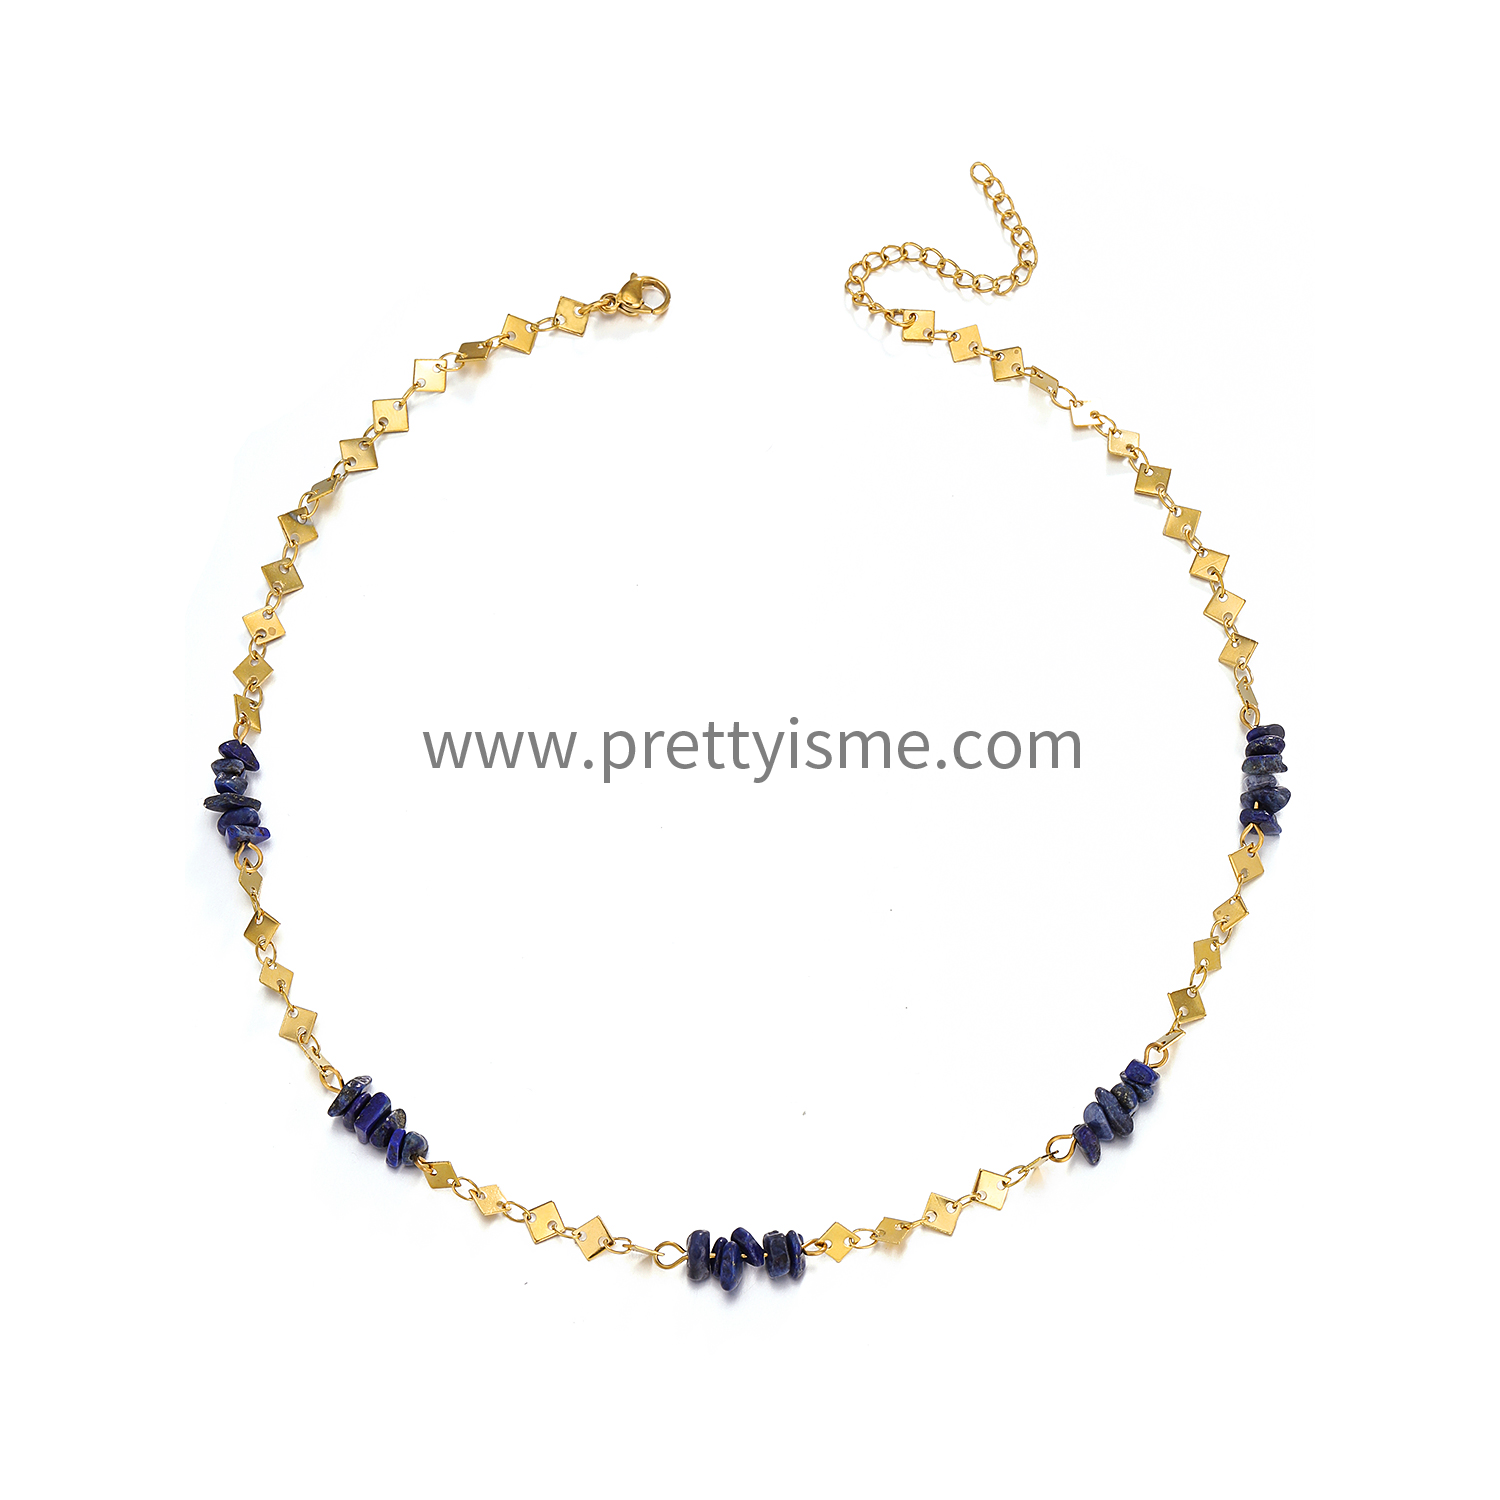 Pretty Is Me Collection Designer 18K Gold Stainless Geometric Square Link Chain Blue Black Stone Beads Choker Necklace Girls (6).webp